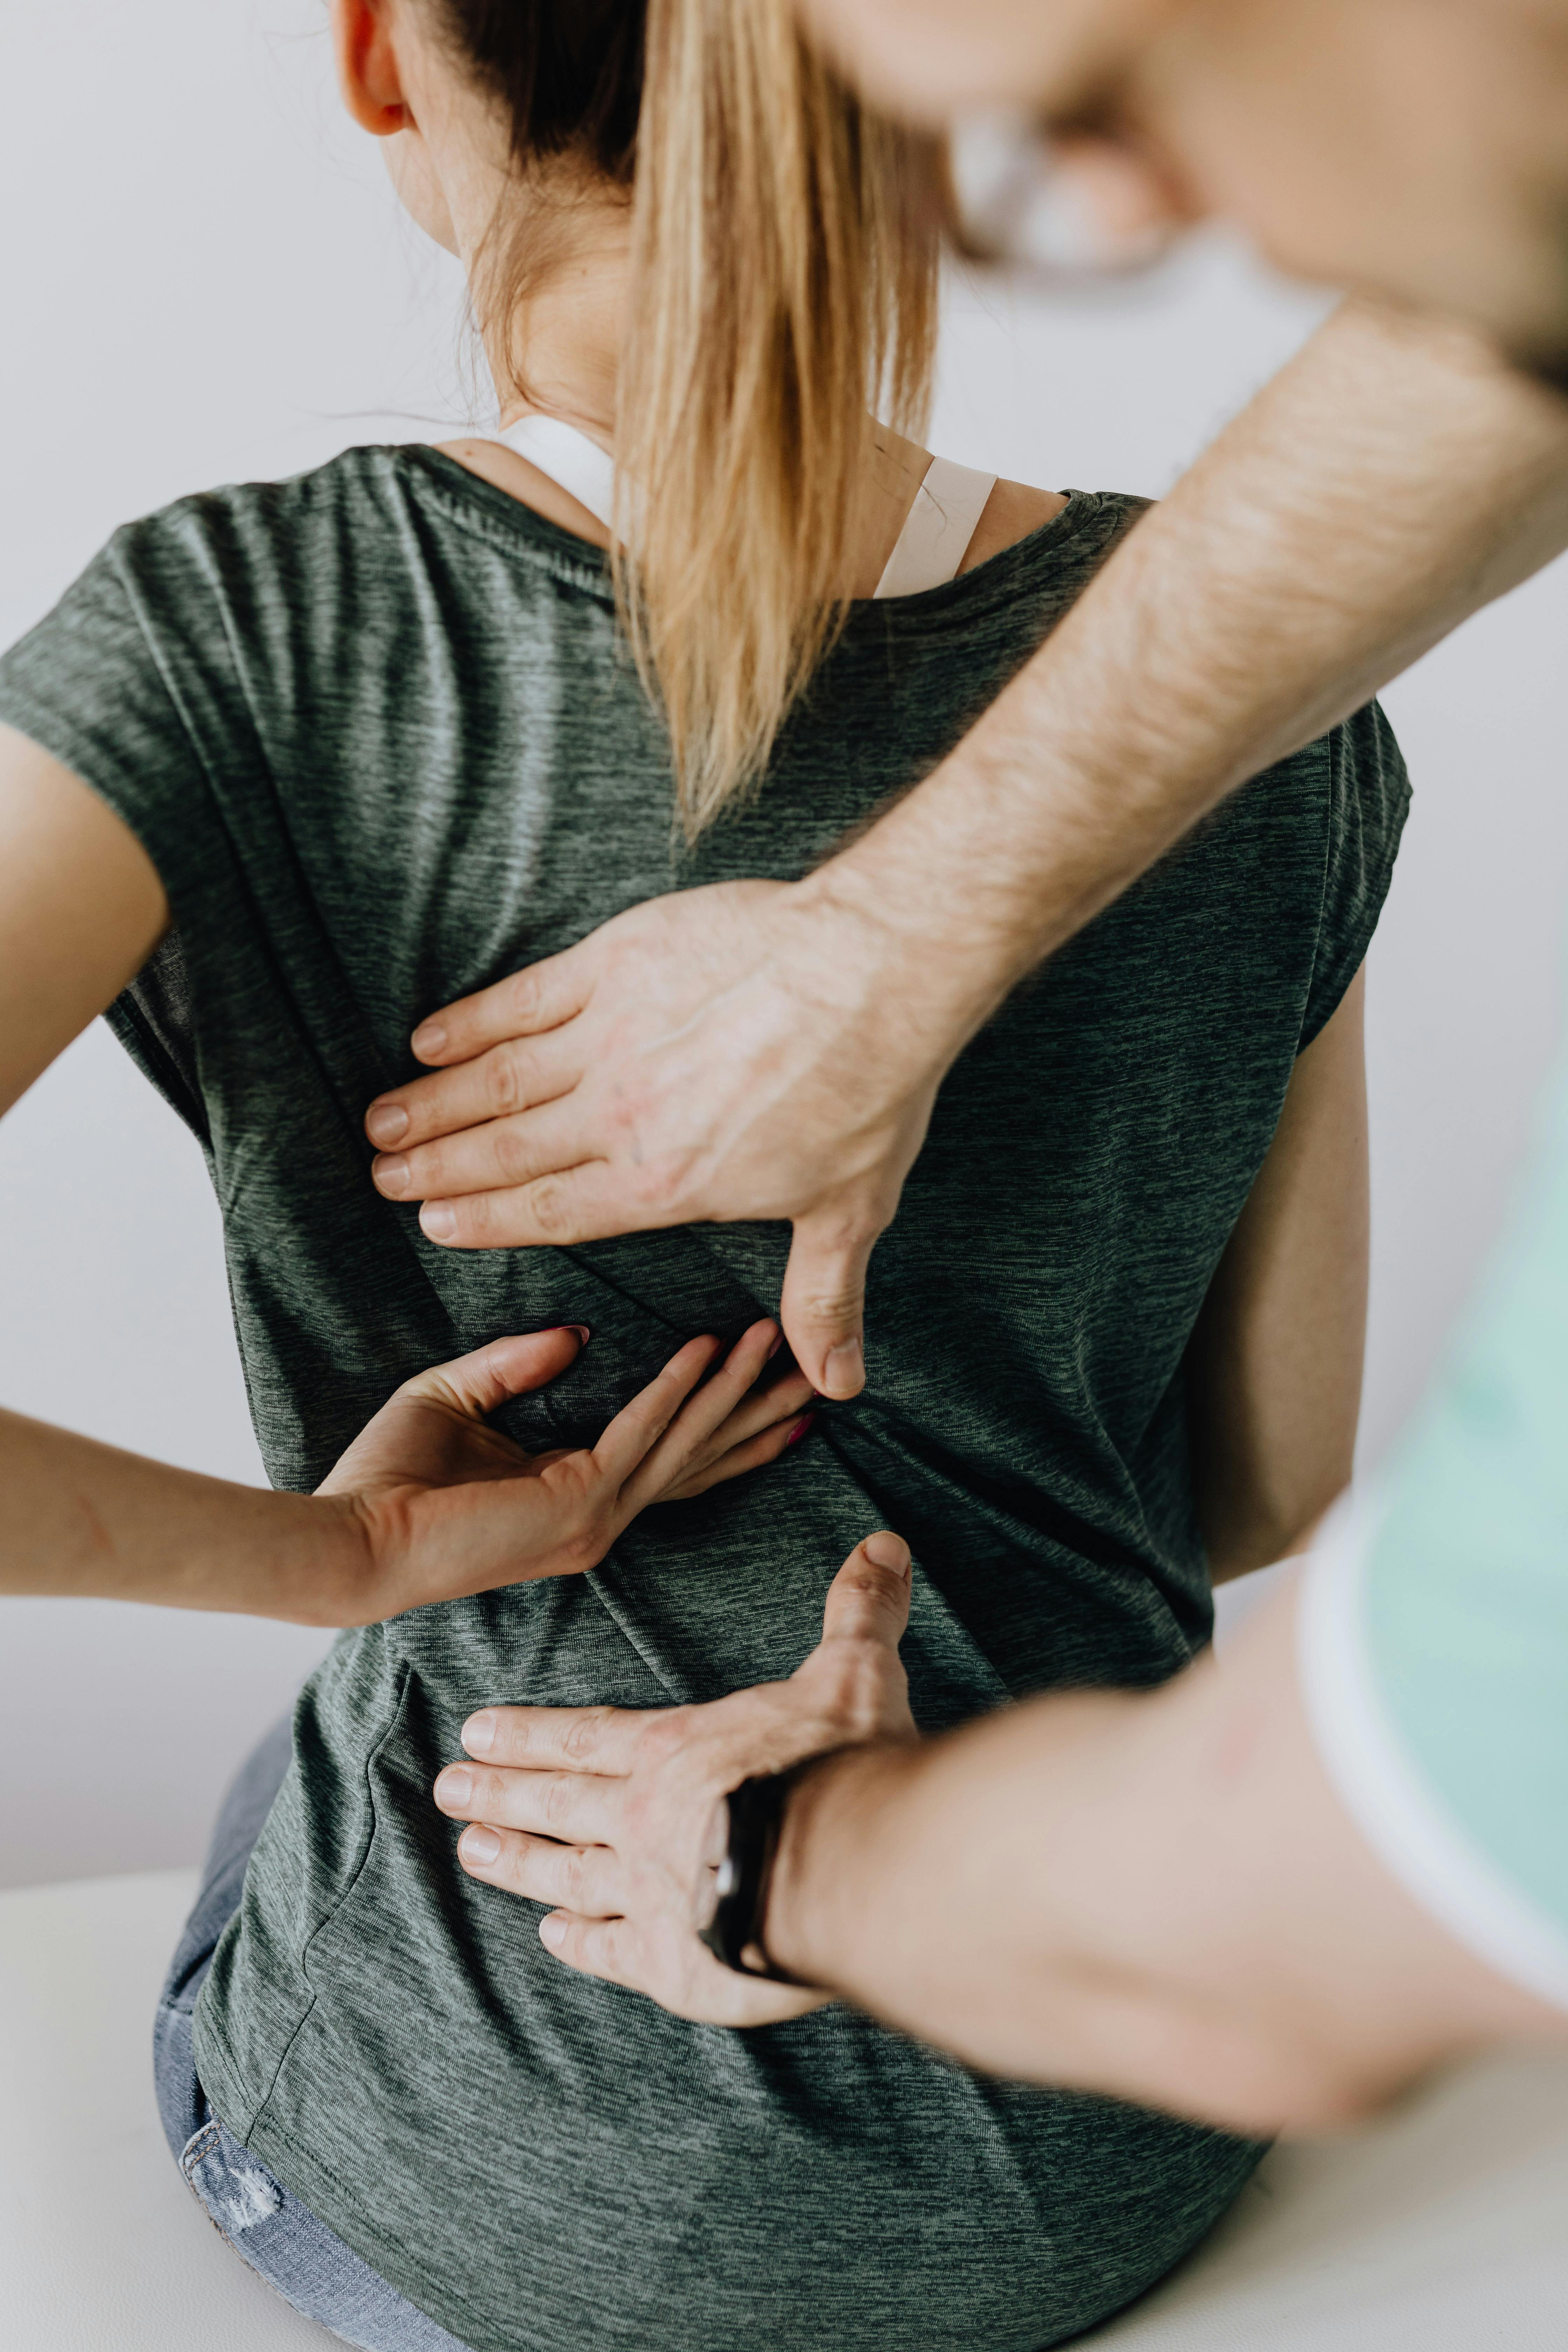 A man tending to a woman's back pain | Source: Pexels